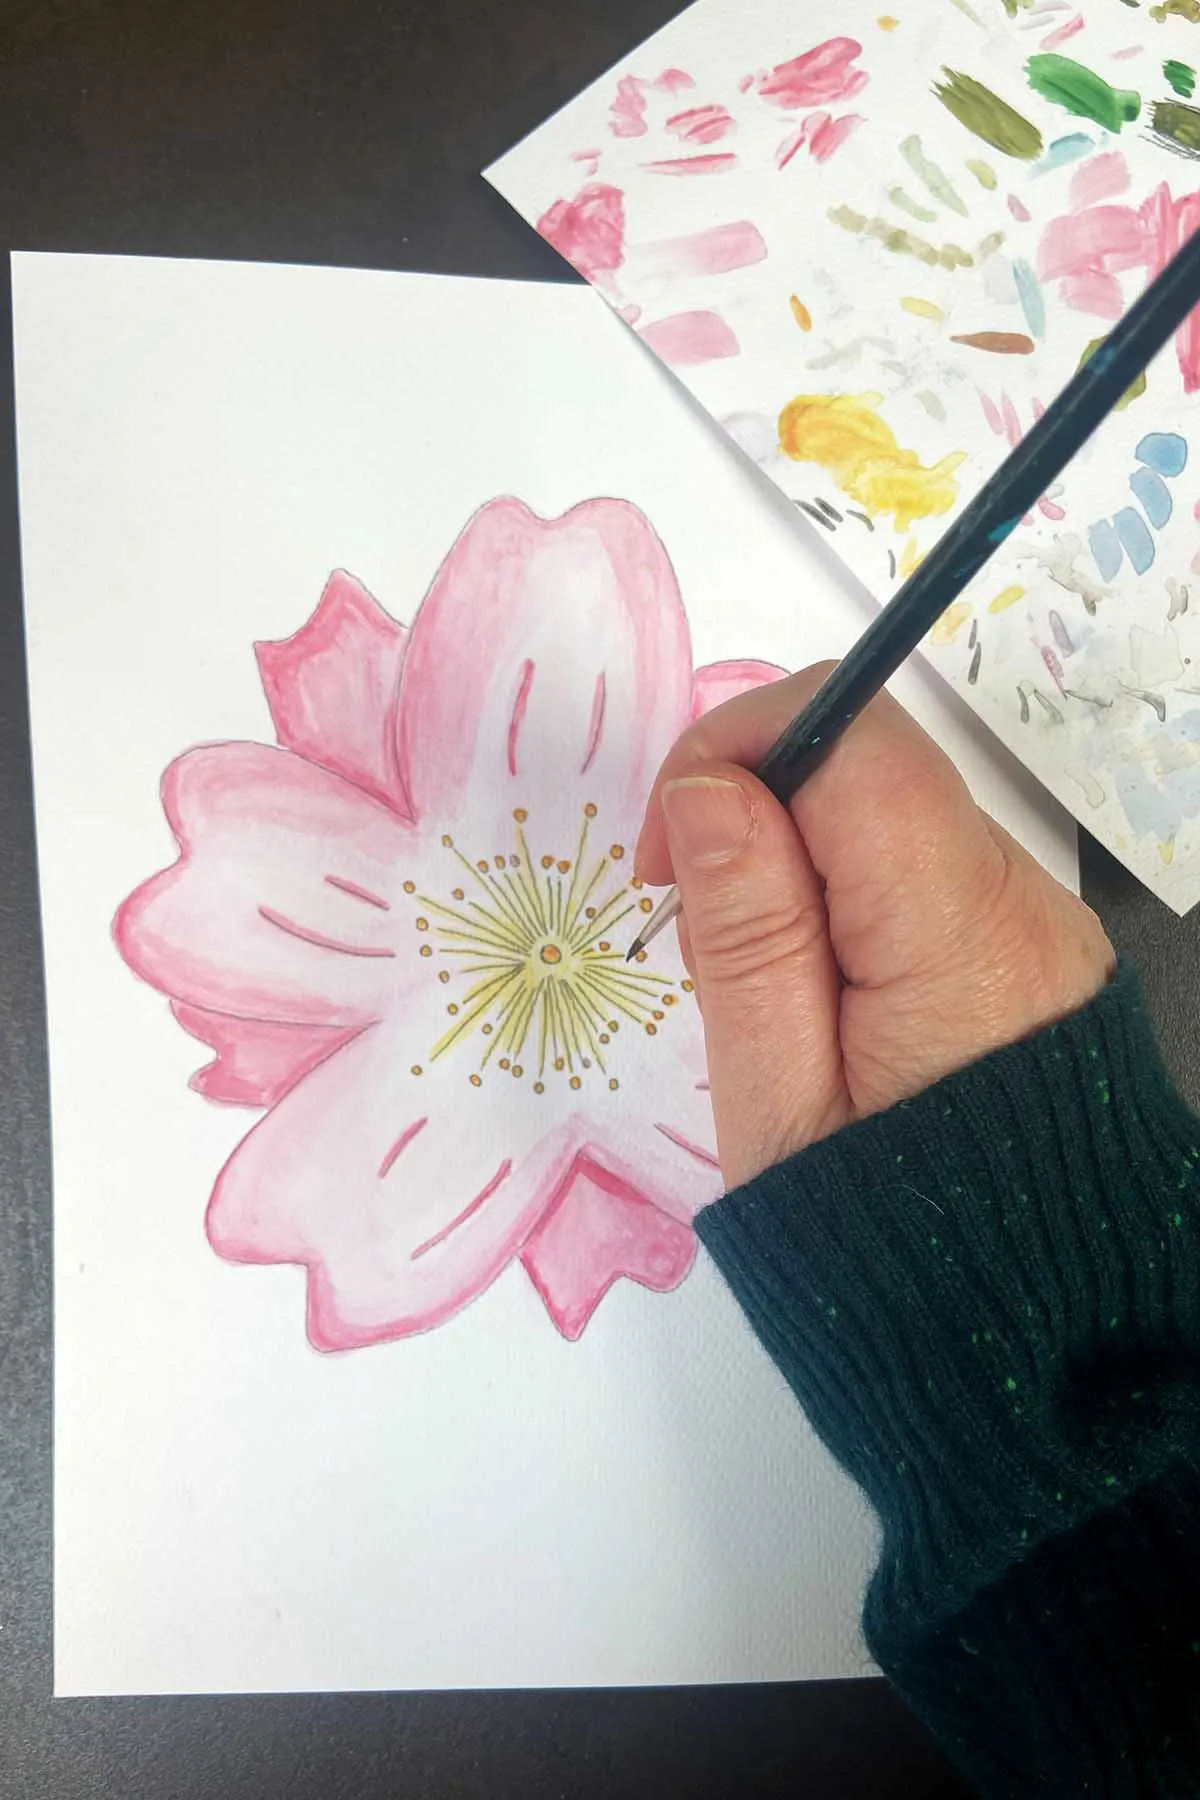 Painting a hand drawn cherry blossom flower